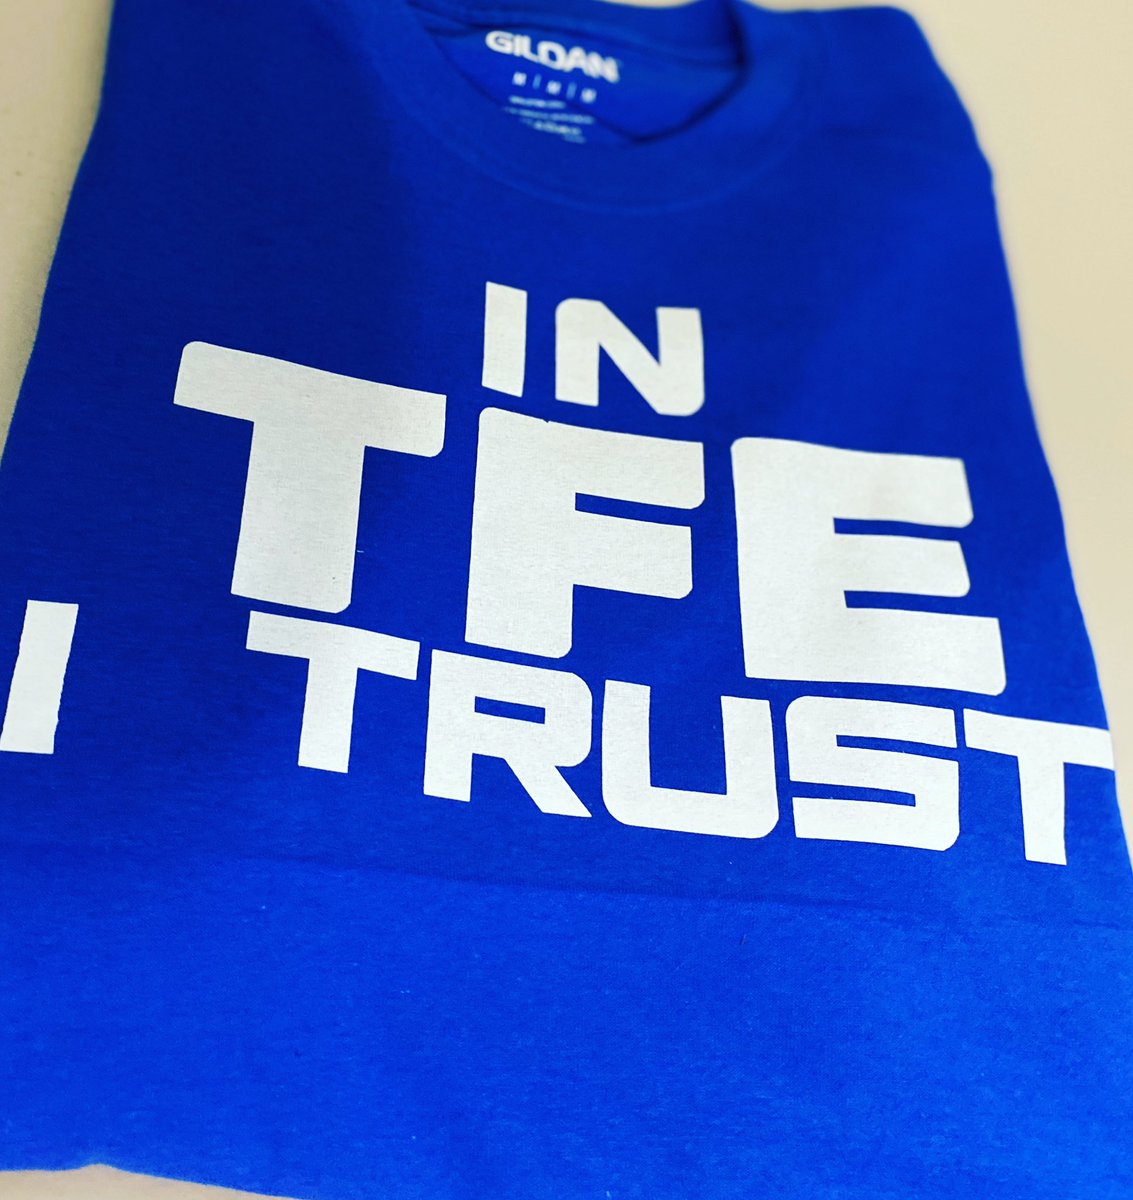 For this #TFETuesday. Rules are simple.  First subscribe to our site. Second get at least 3-5 people to subscribe. Send a screenshot of them subscribing and have a chance to win the brand new TFE t shirt.  #contest #forever #embracethedifference